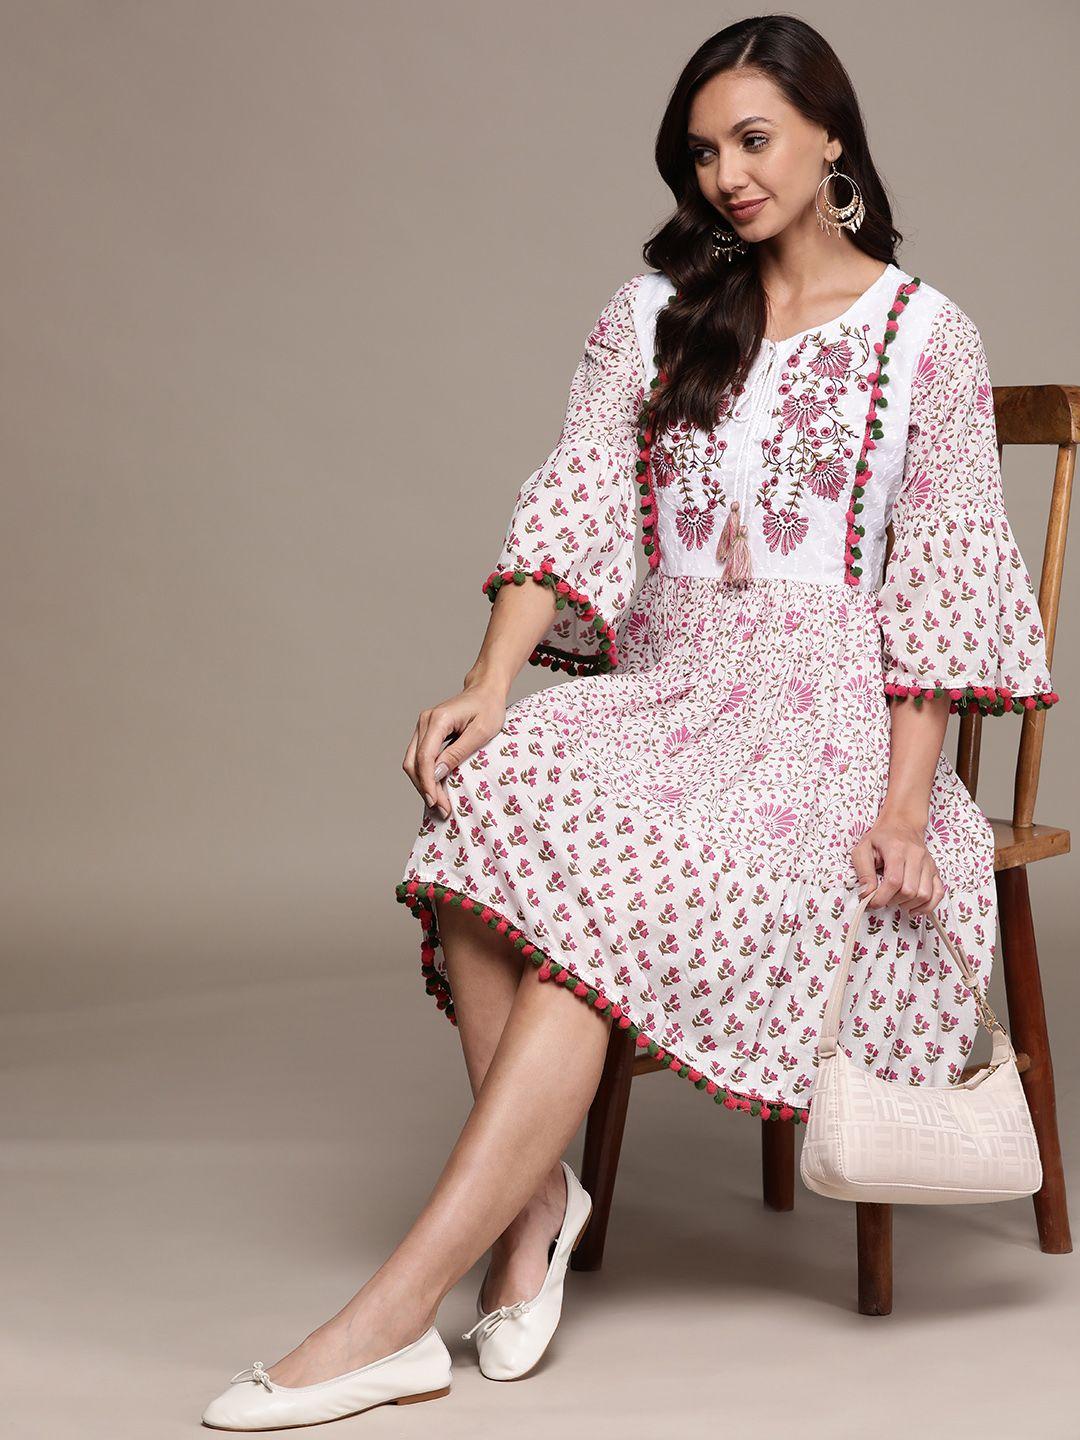 Ishin White & Pink Floral Embroidered Tie-Up Neck A-Line Dress